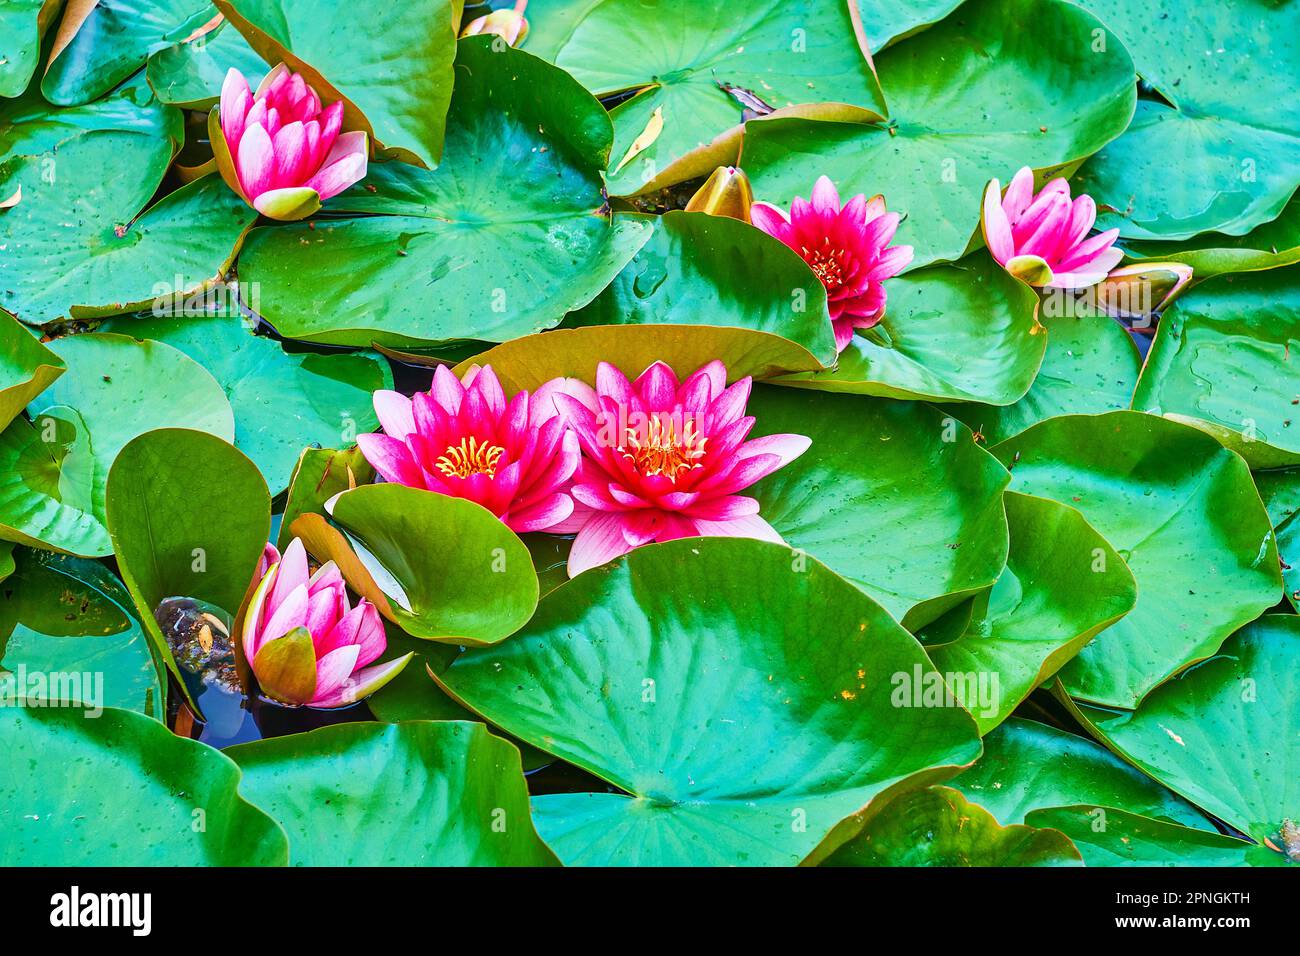 The closeup view of bright magenta flowers and green leaves of Nymphaea Escarboucle (waterlily) Stock Photo